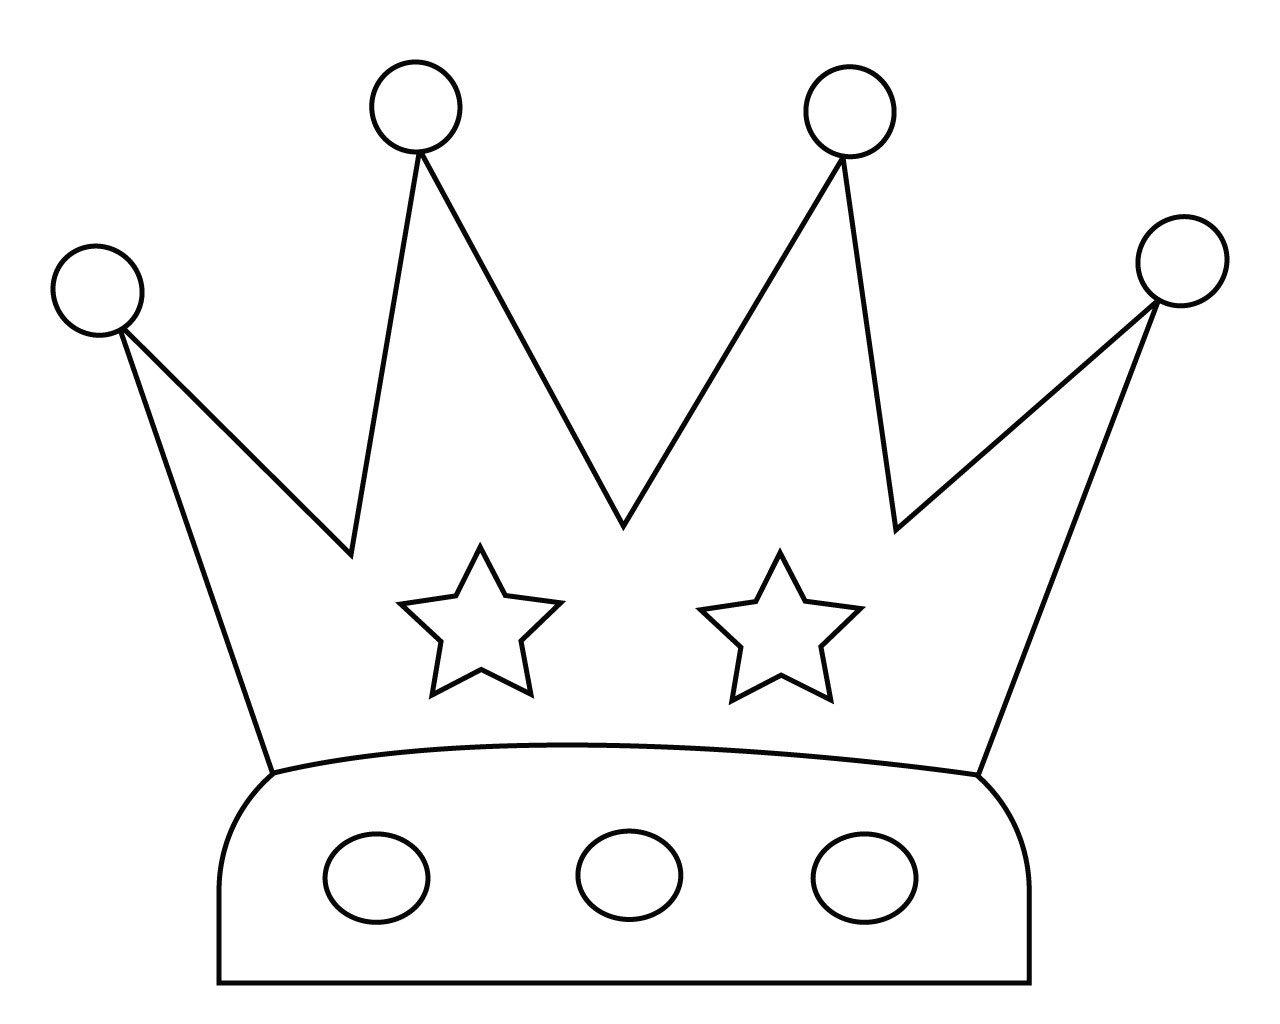 Crown Coloring Page To Print, Simple And Easy Pictures – Free Coloring